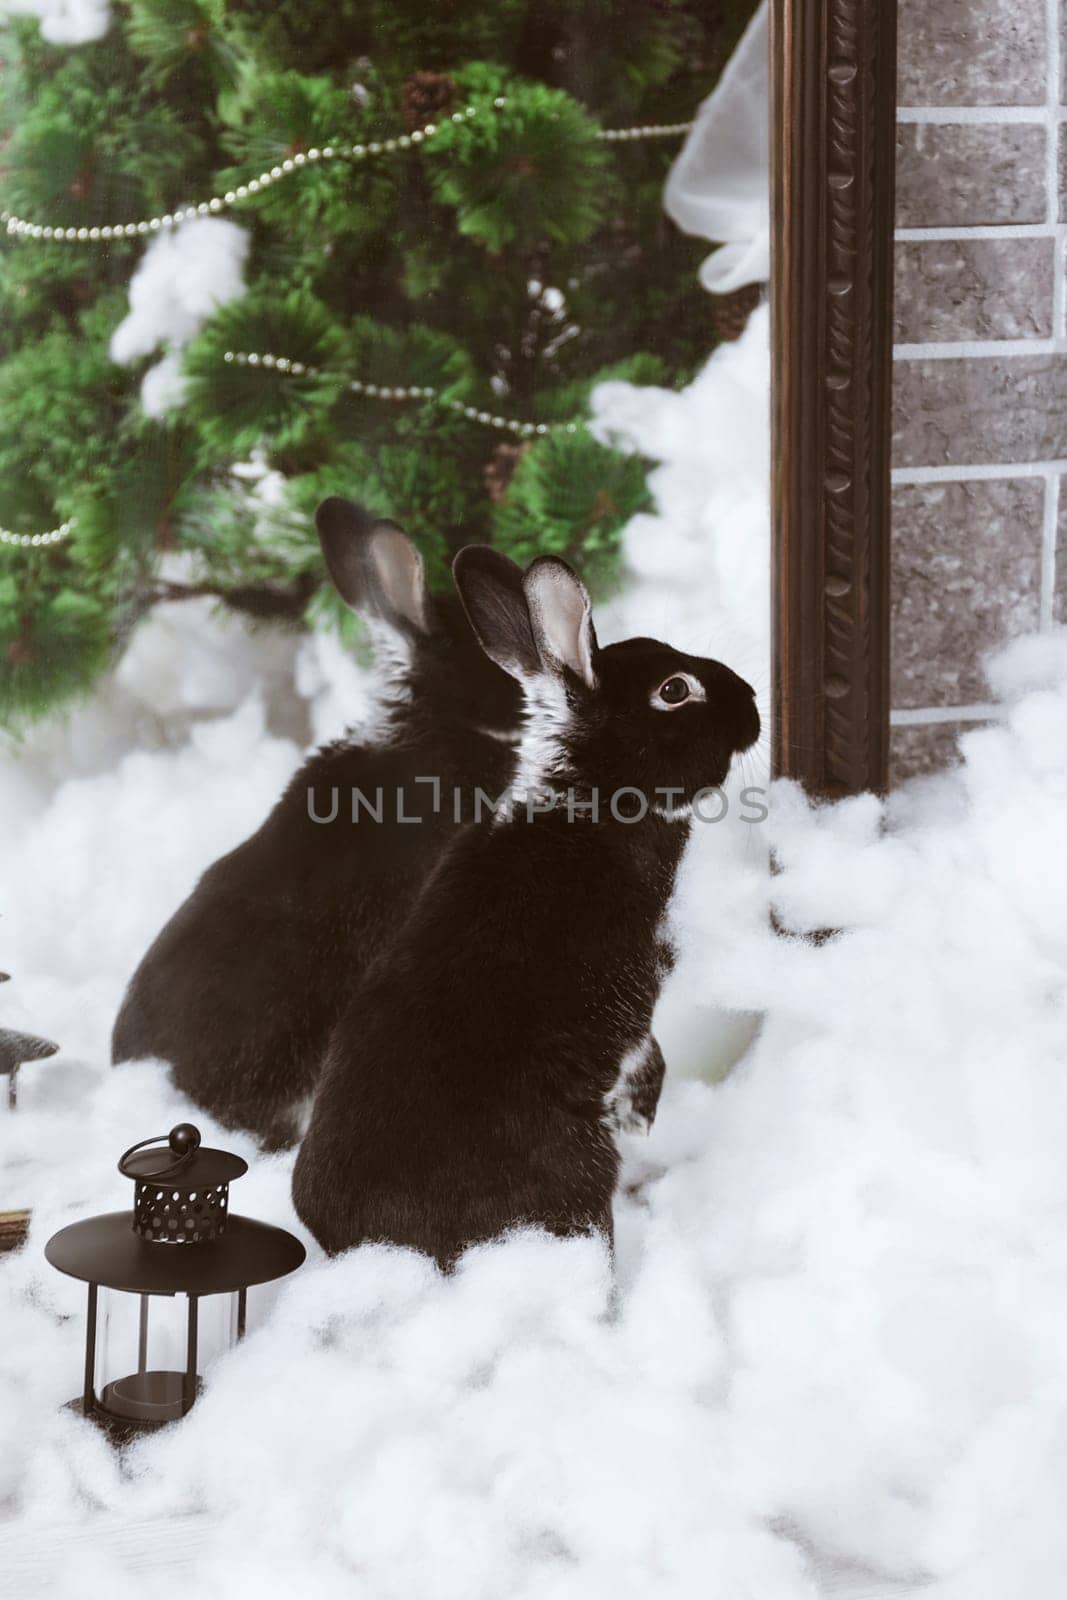 A black rabbit in artificial snow near the mirror looks away. The symbol of the year in snow decorations